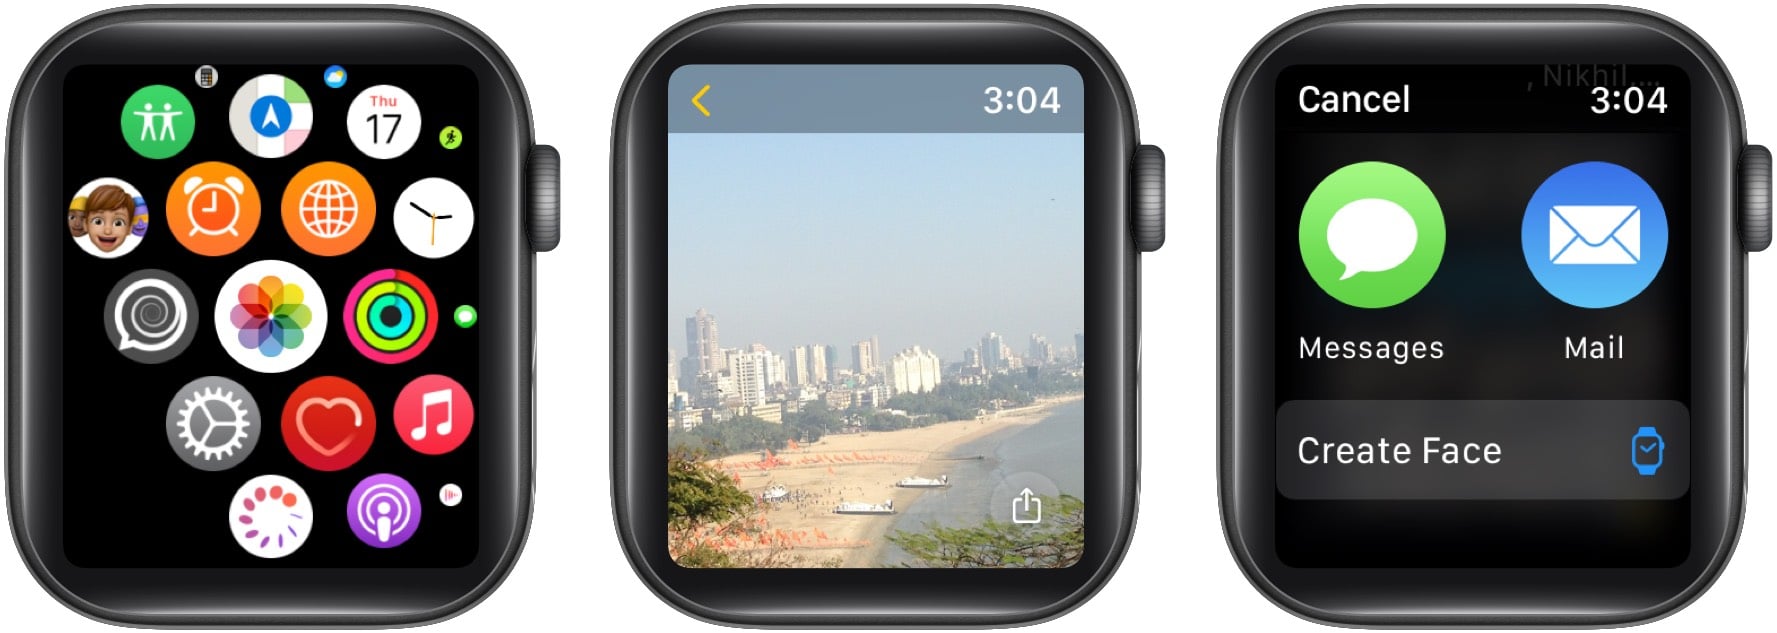 Directly send photos from Apple Watch using Messages or Mail app